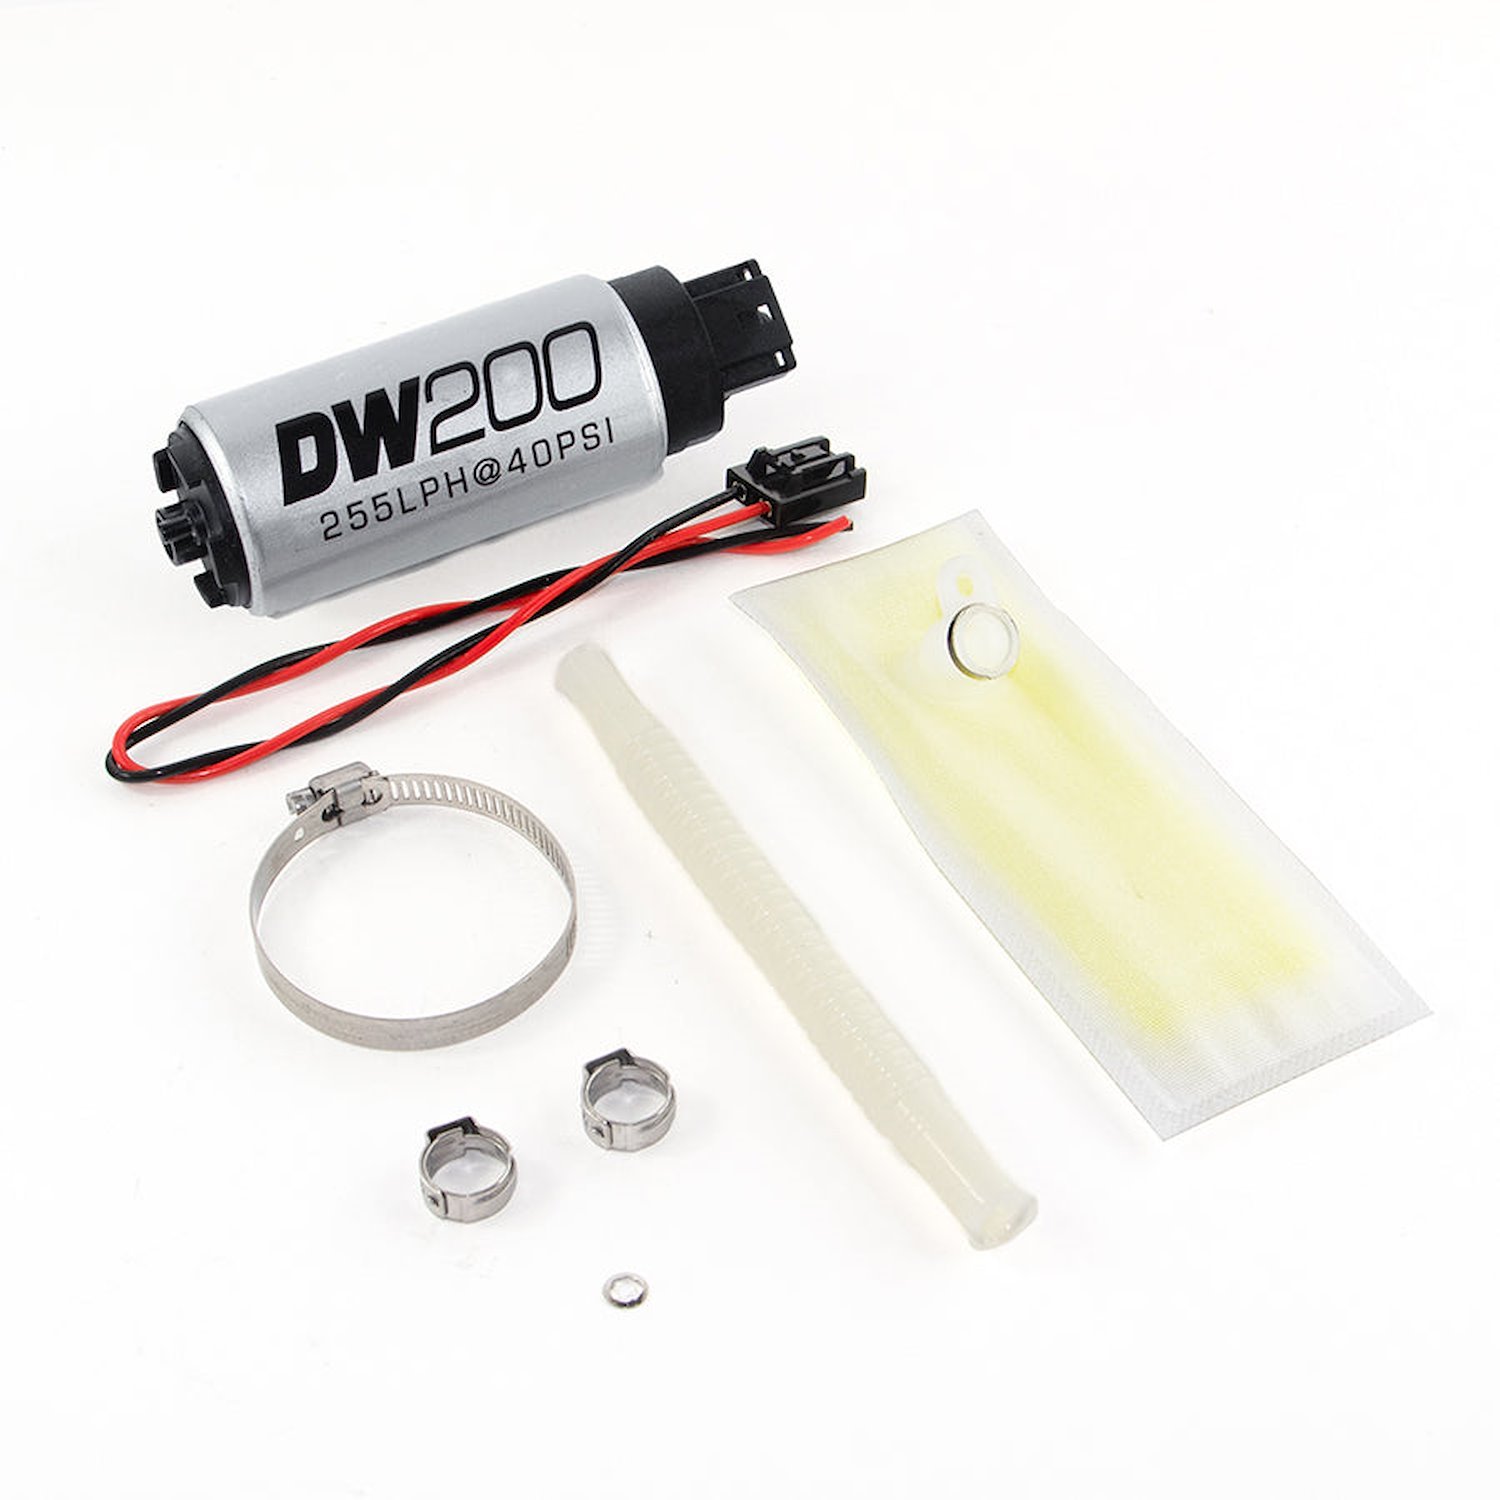 92011031 DW200 Series 255lph In-tank Fuel Pump w/ Install Kit for BMW